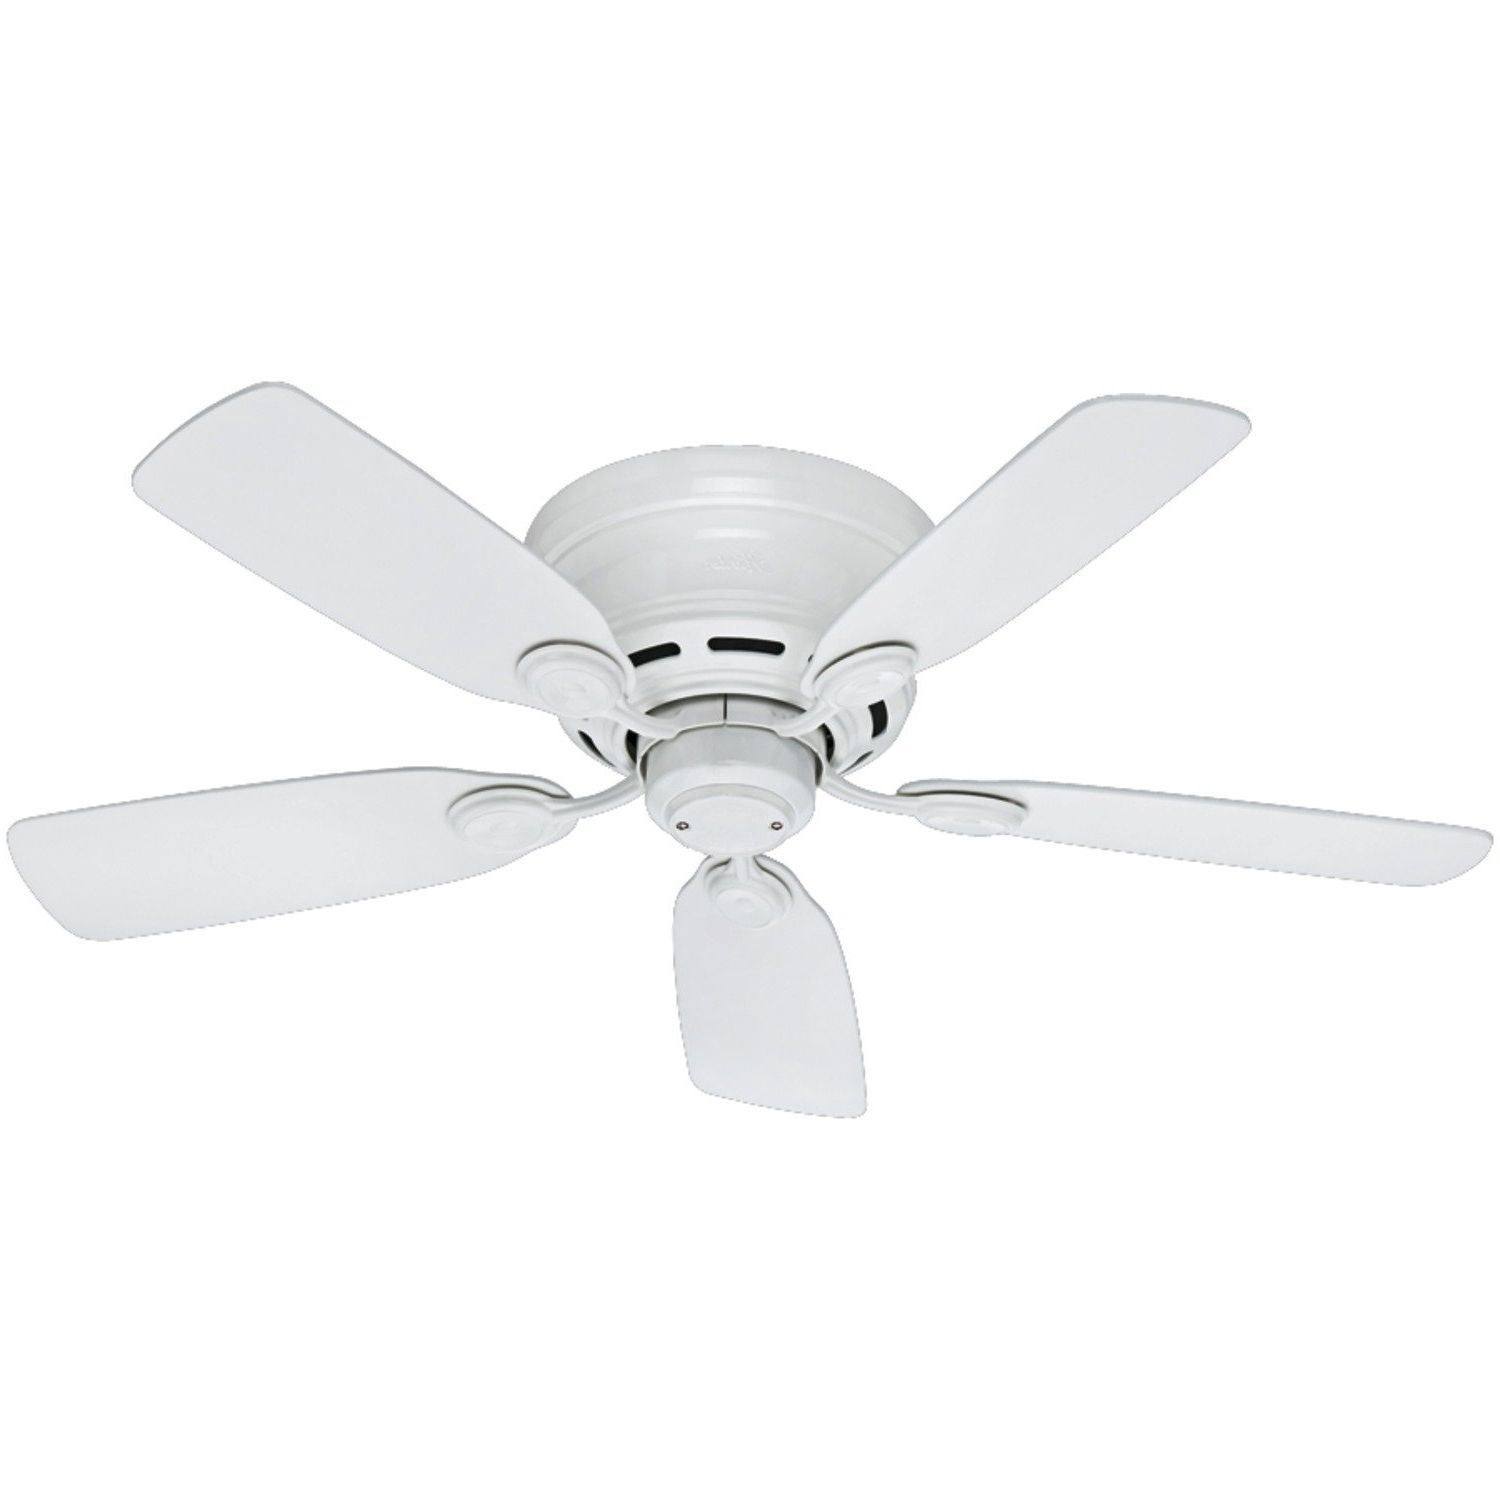 2018 Flush Mount Ceiling Fans Review – Choose The Best Throughout Outdoor Ceiling Fans With Long Downrod (View 15 of 20)